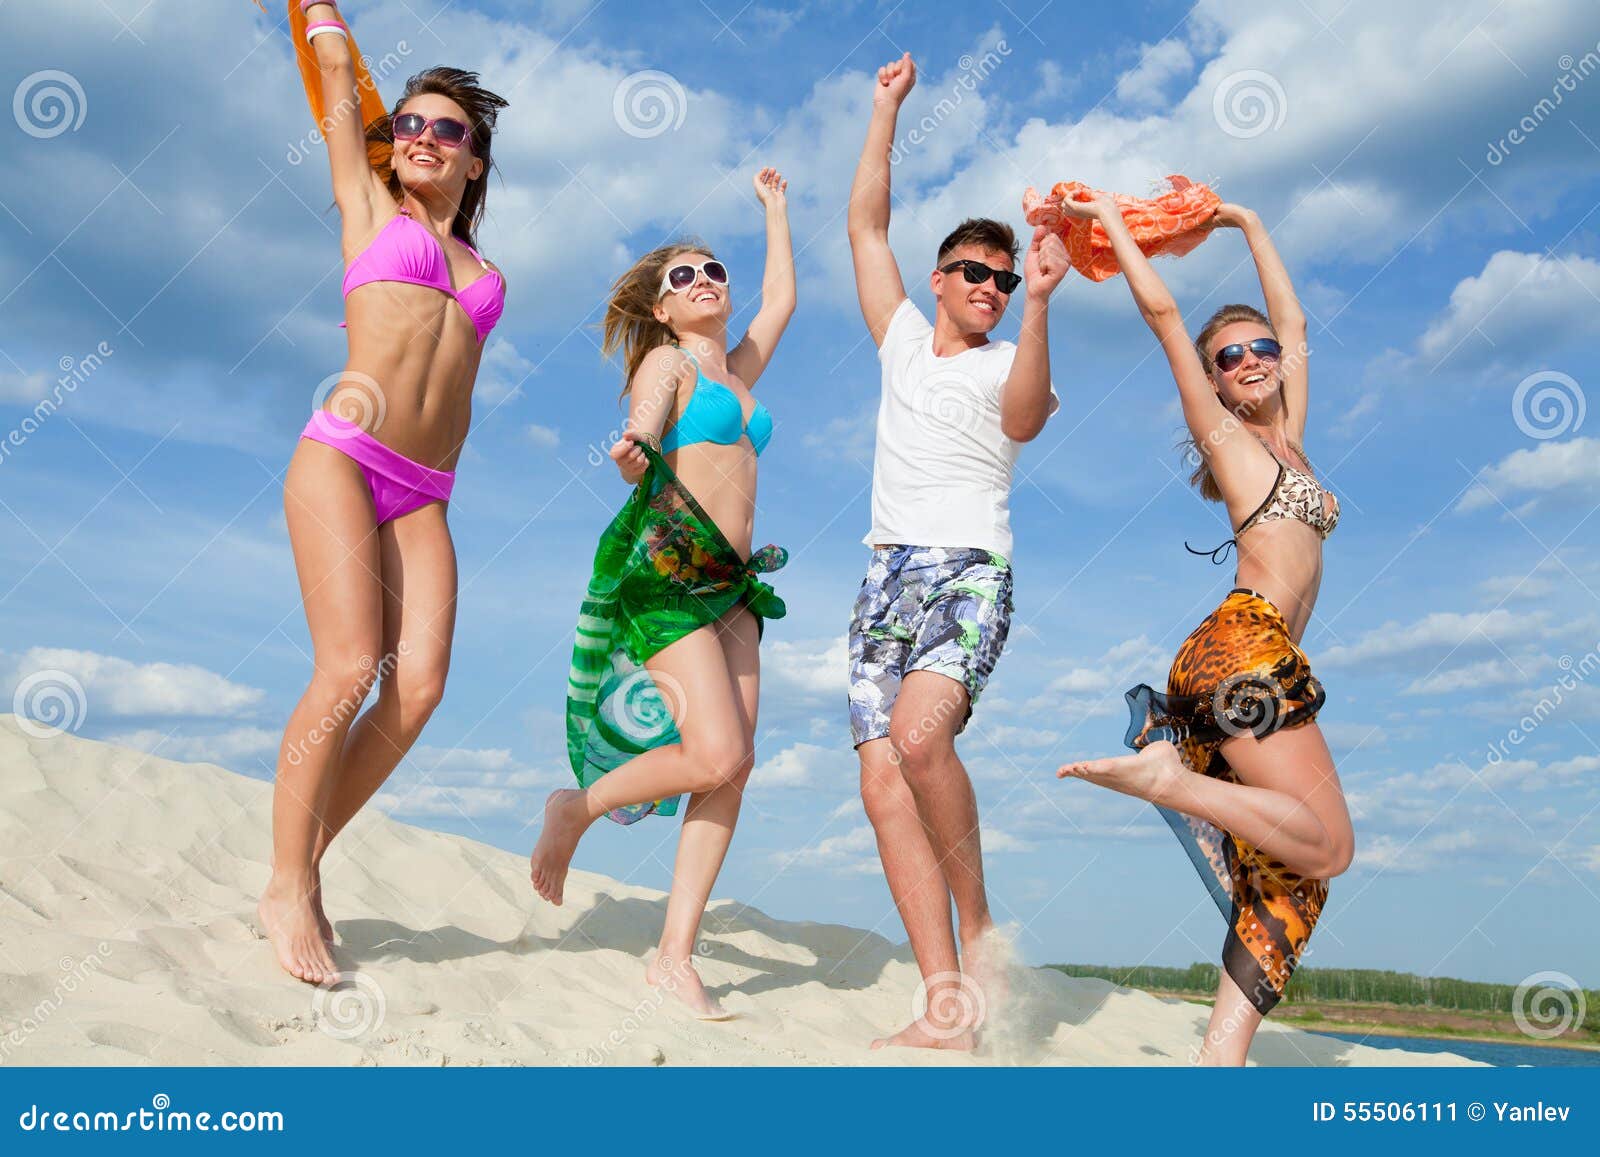 Beach teens party stock image. Image of adolescence, human - 55506111